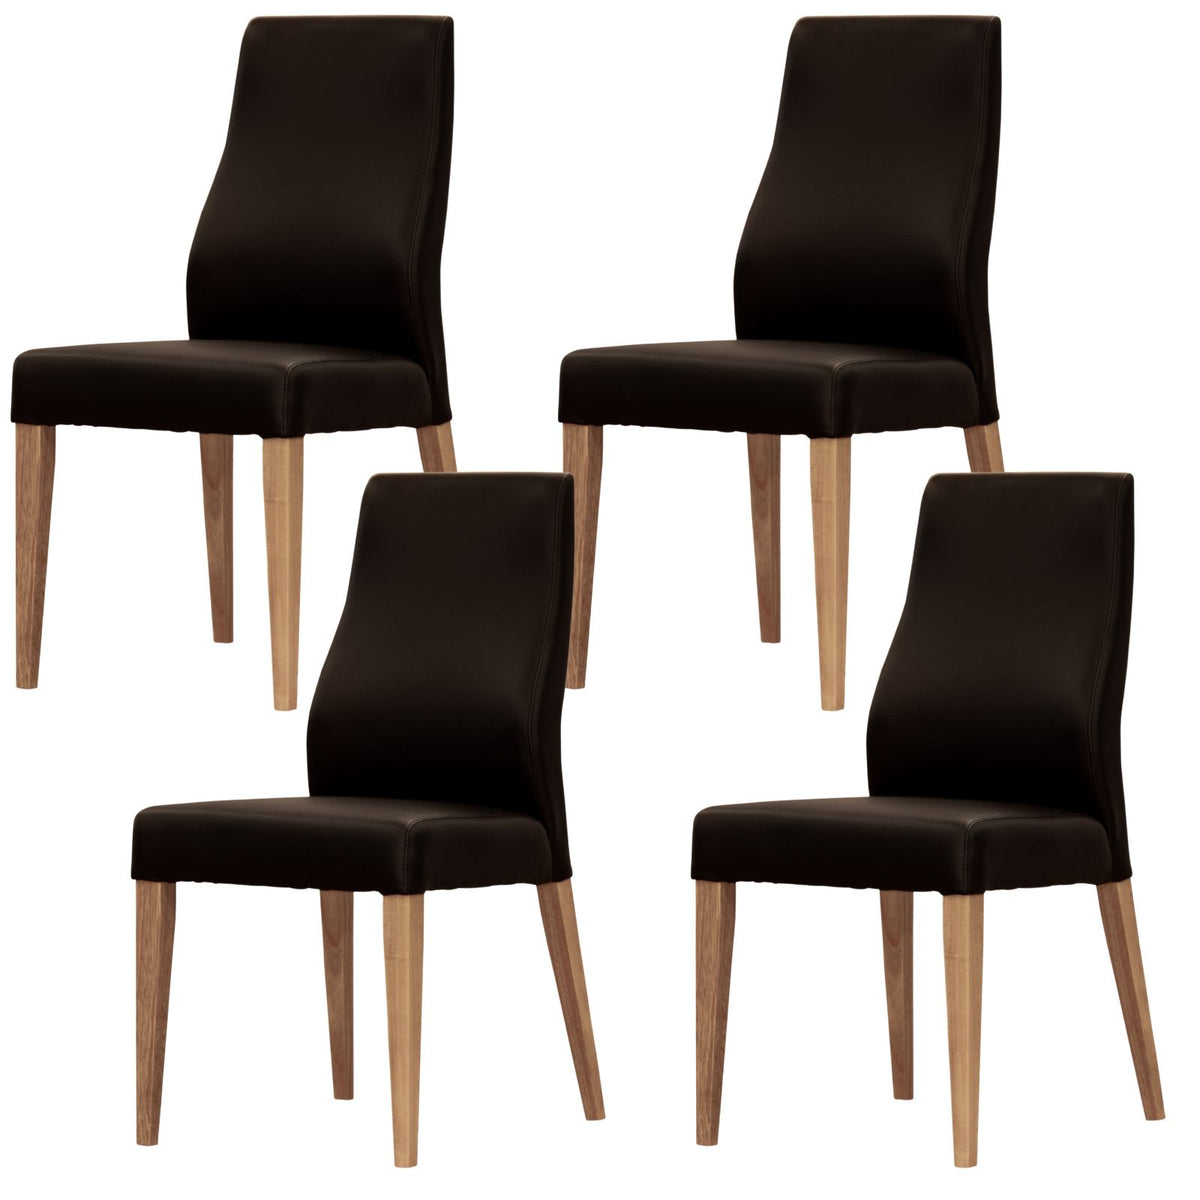 Rosemallow Dining Chair Set of 4 PU Leather Seat Solid Messmate Timber - Black